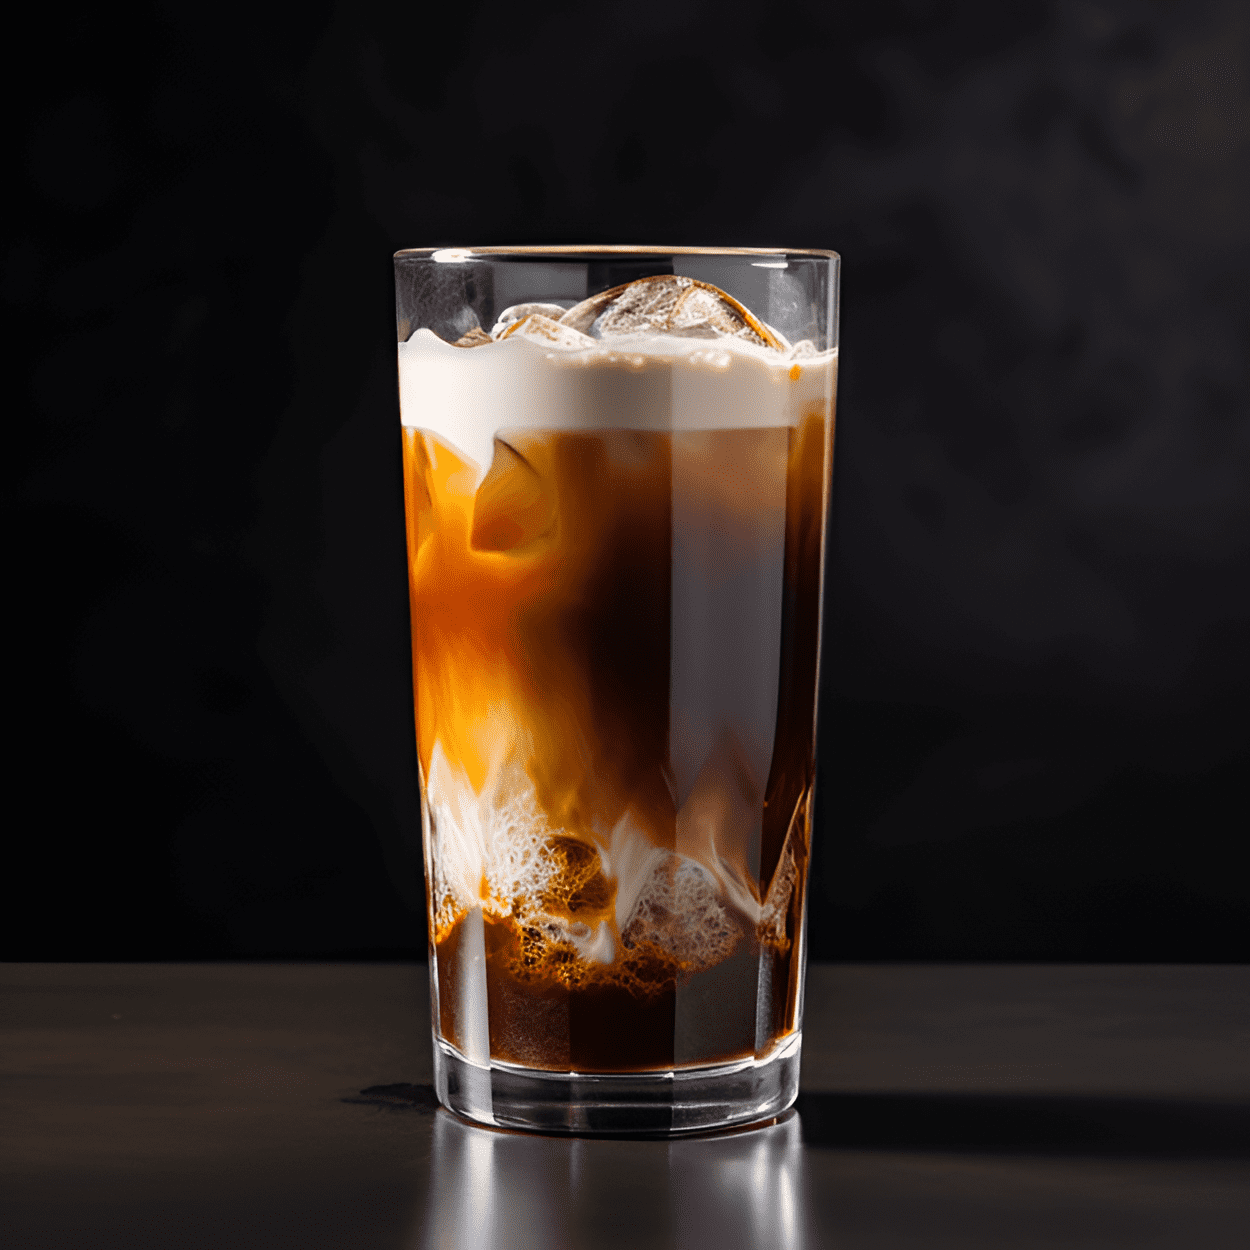 Naruto Starbucks Cocktail Recipe - This cocktail is a delightful mix of sweet and bitter, with the robust flavor of coffee blending seamlessly with the smooth, ricey taste of sake. The addition of vanilla syrup adds a hint of sweetness that balances the strong coffee flavor.